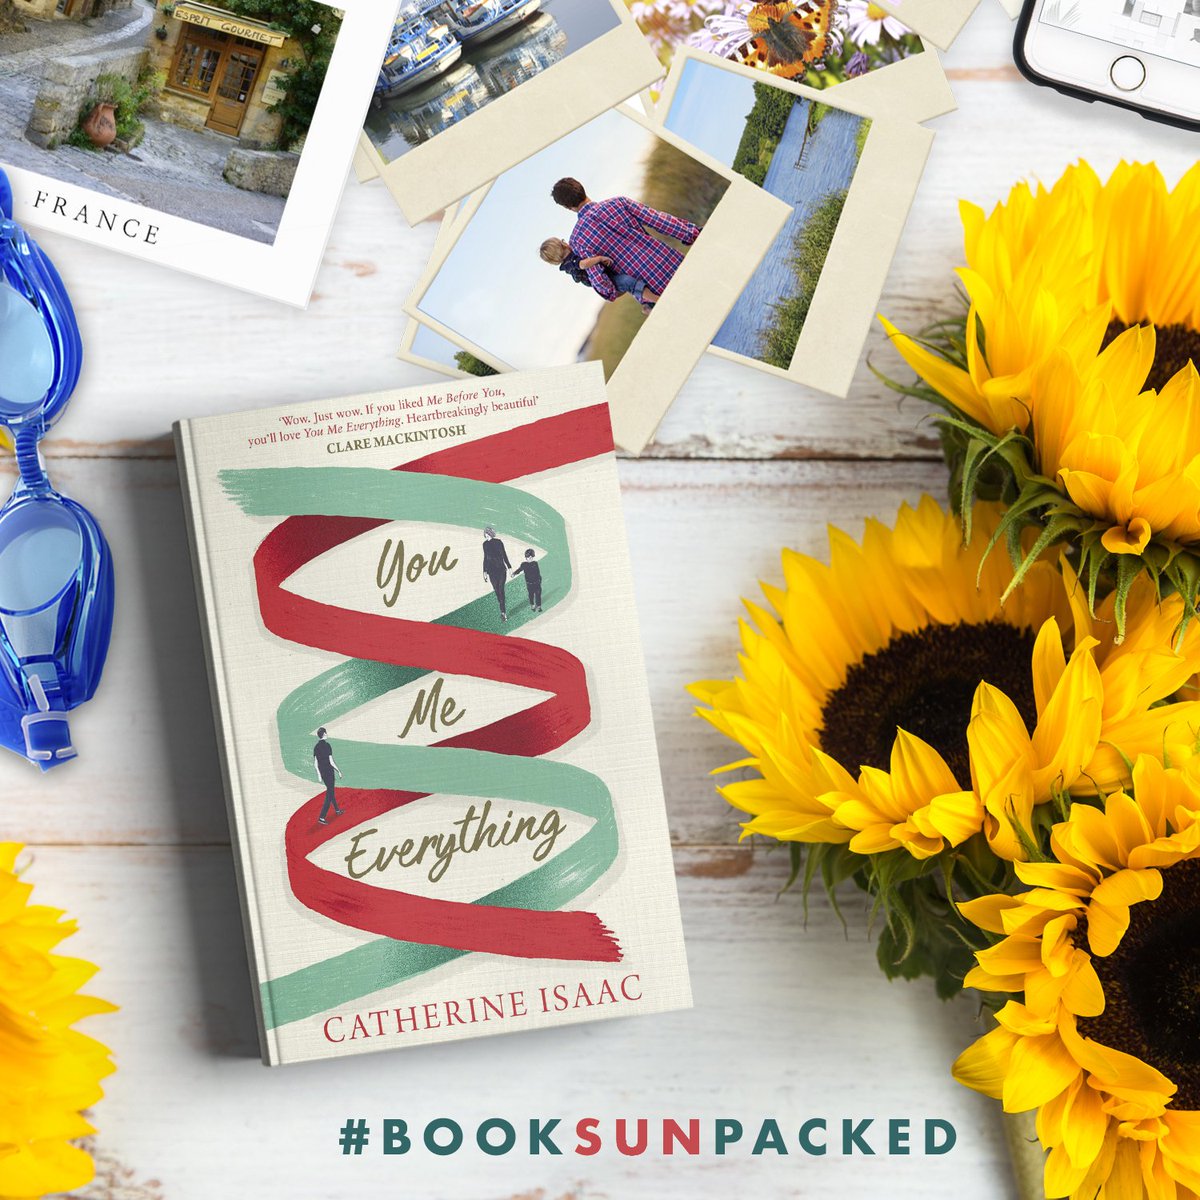 Stay tuned to @CatherineIsaac_ tomorrow for a very exciting announcement! 

And if you haven't already read the unputdownable #YouMeEverything, you can win it in our summer #BOOKSUNPACKED competition bit.ly/2Jr0FcJ